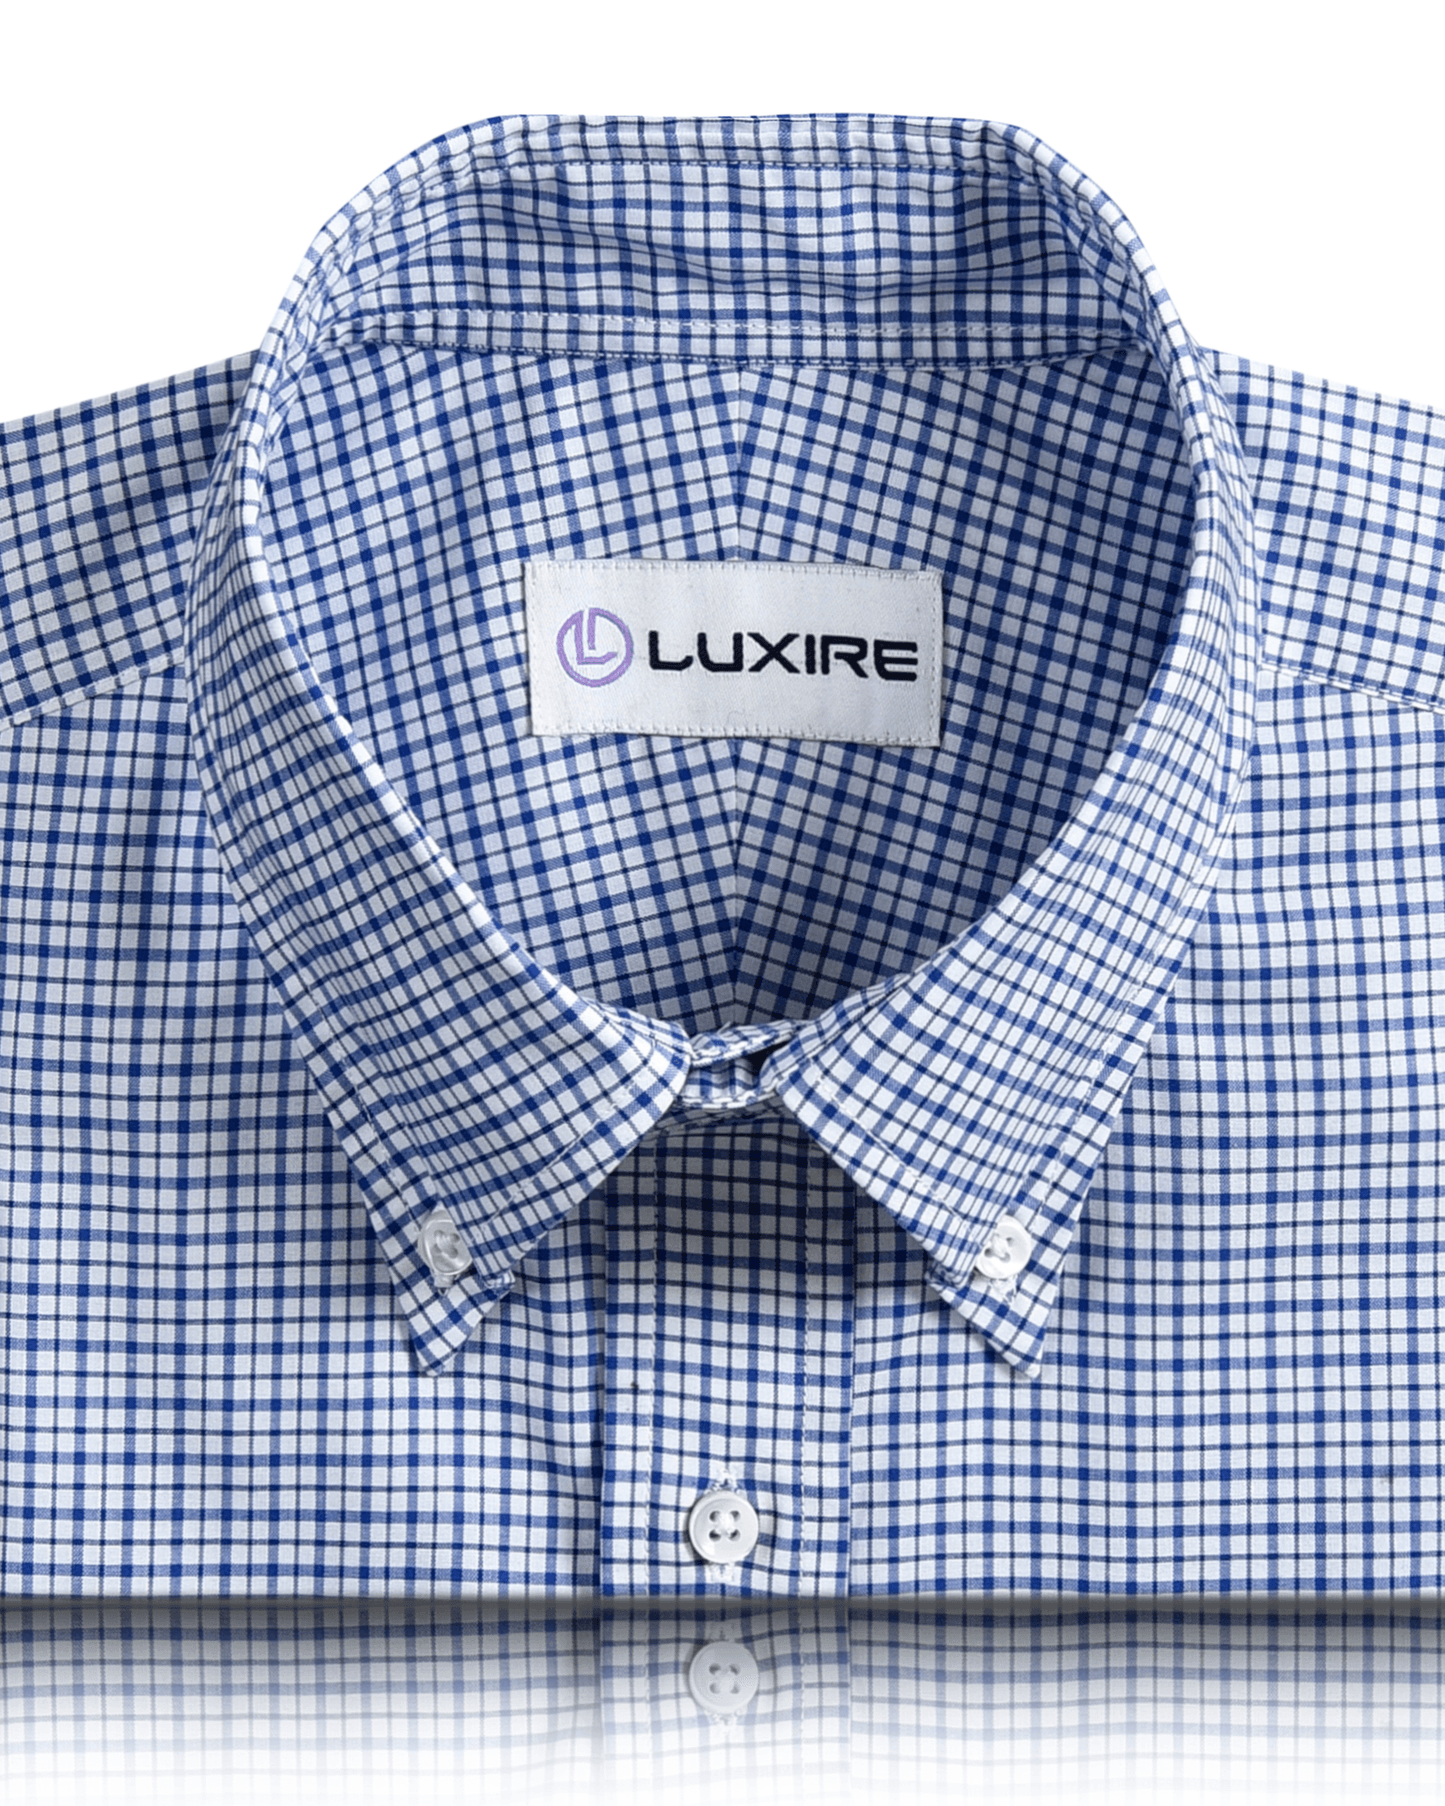 Front close view of custom check shirts for men by Luxire navy checks on white